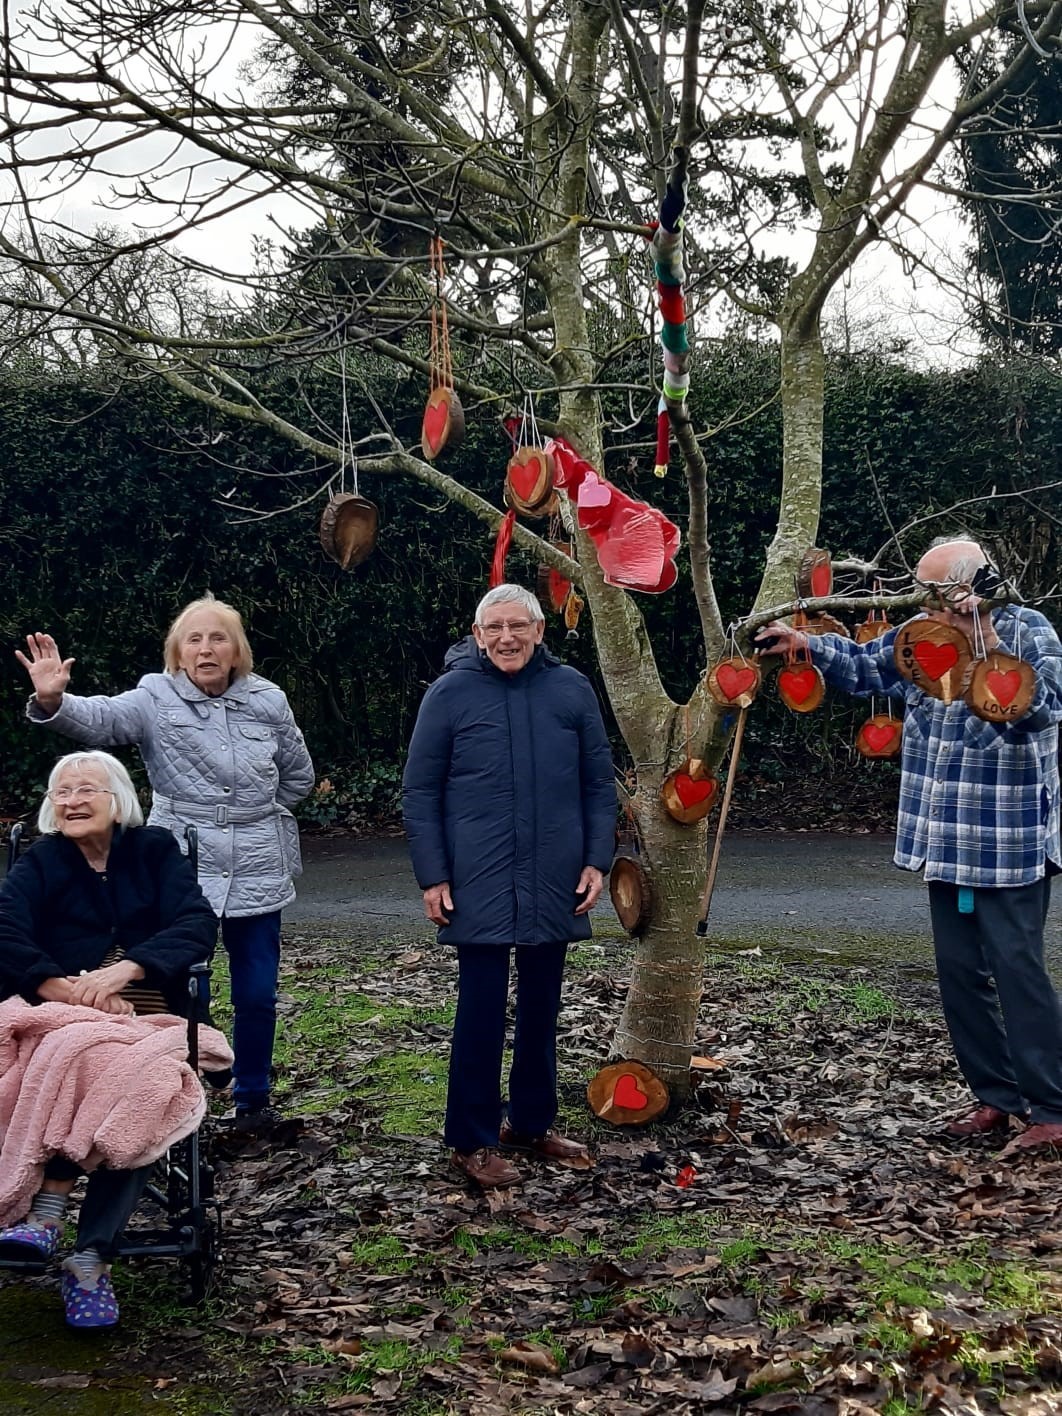 Residents at Field House care home in Hagley paid their respects to Captain Sir Tom Moore by completing a lap of honour around the grounds in his memory